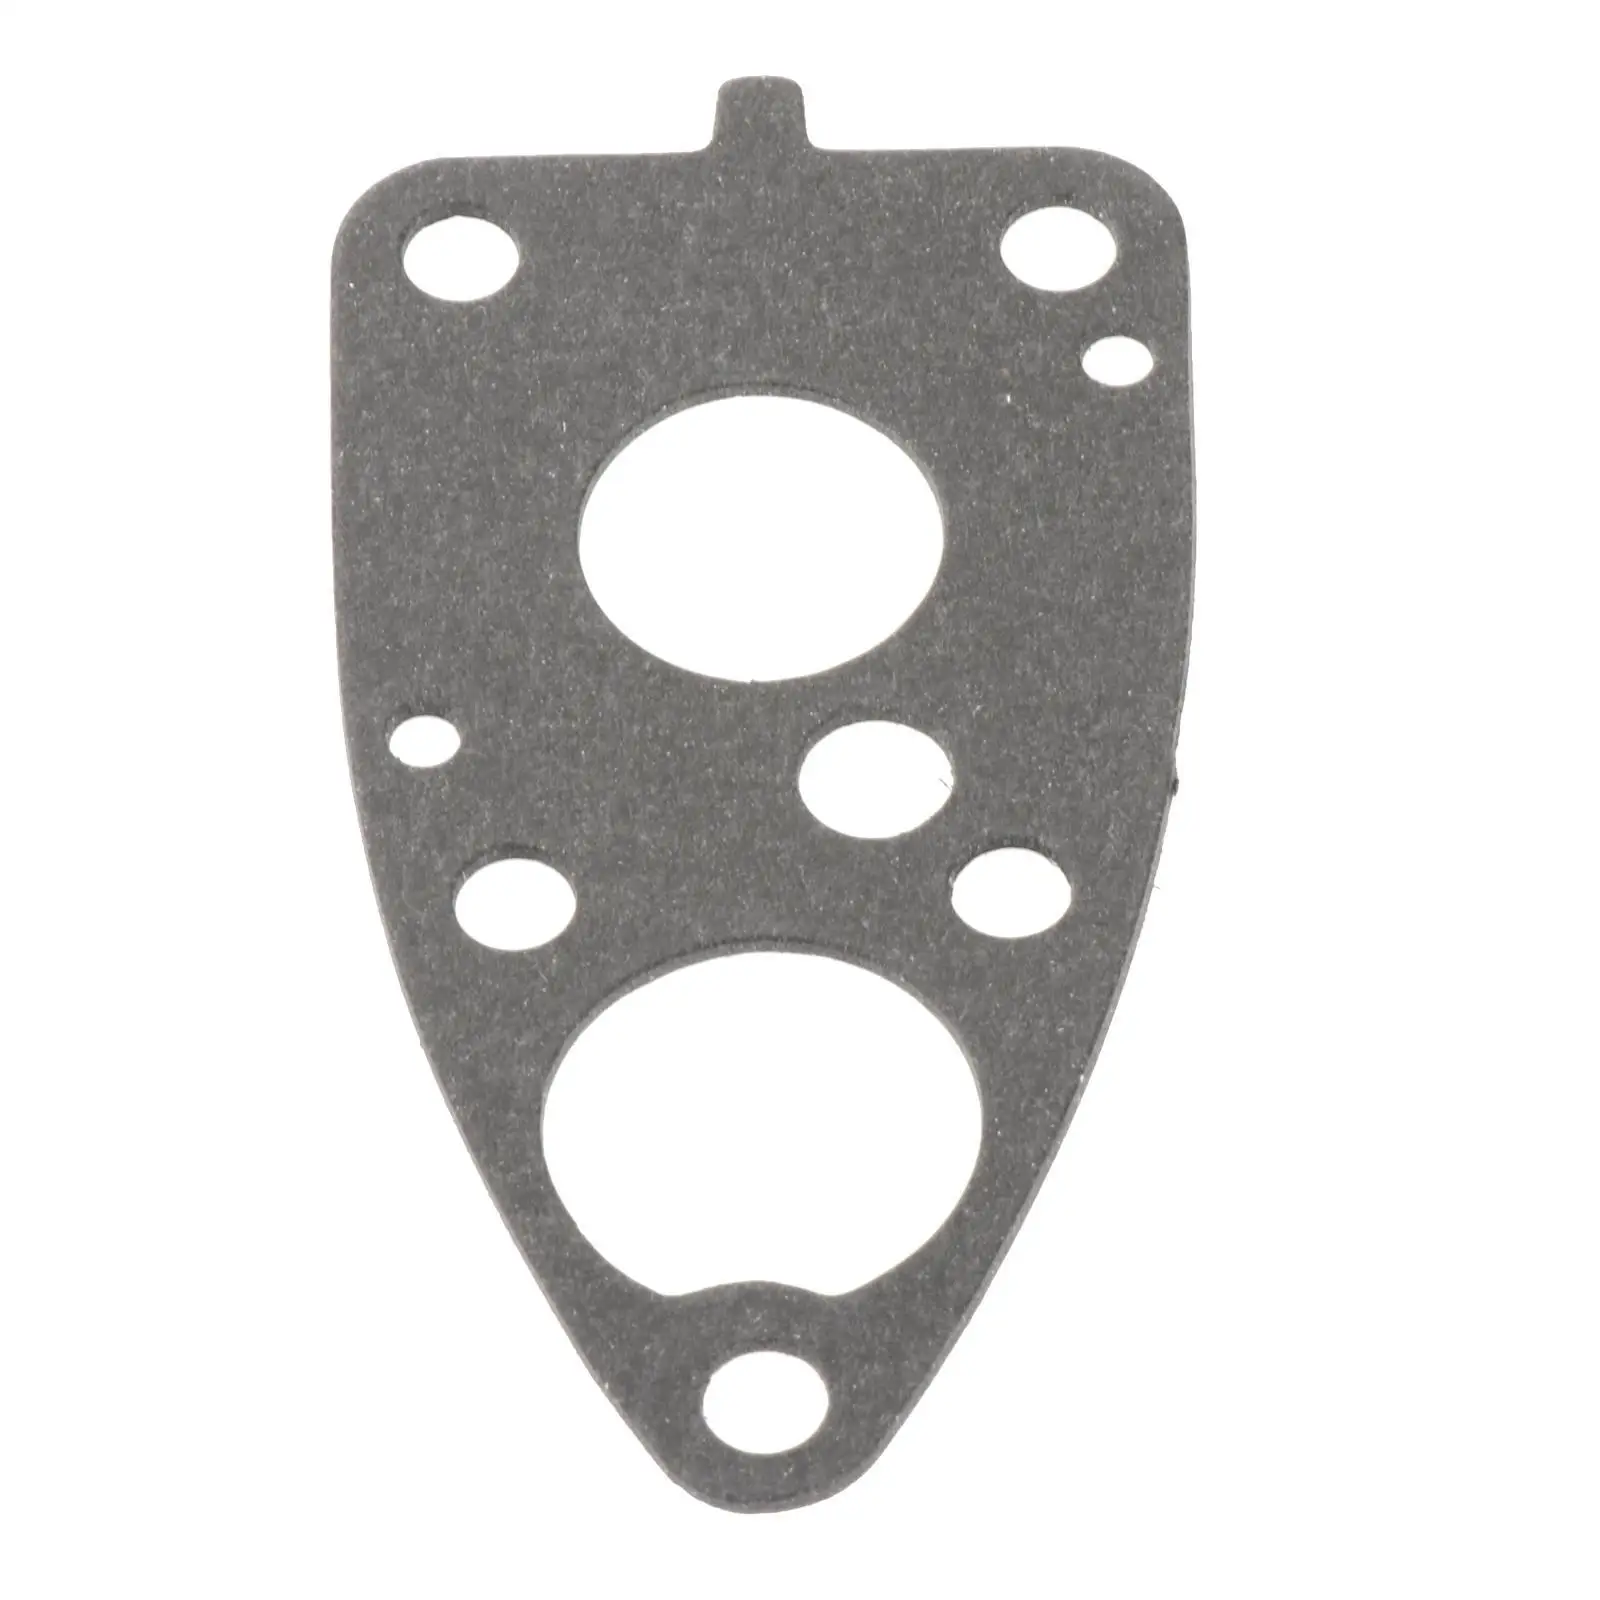 Packing Lower Case, Parts Lower Gear Case Plate Gasket Fit for Yamaha F4A 4A 4B 5C 6E0-45315-A0-00 6E0-45315-A0 Outboard Engine